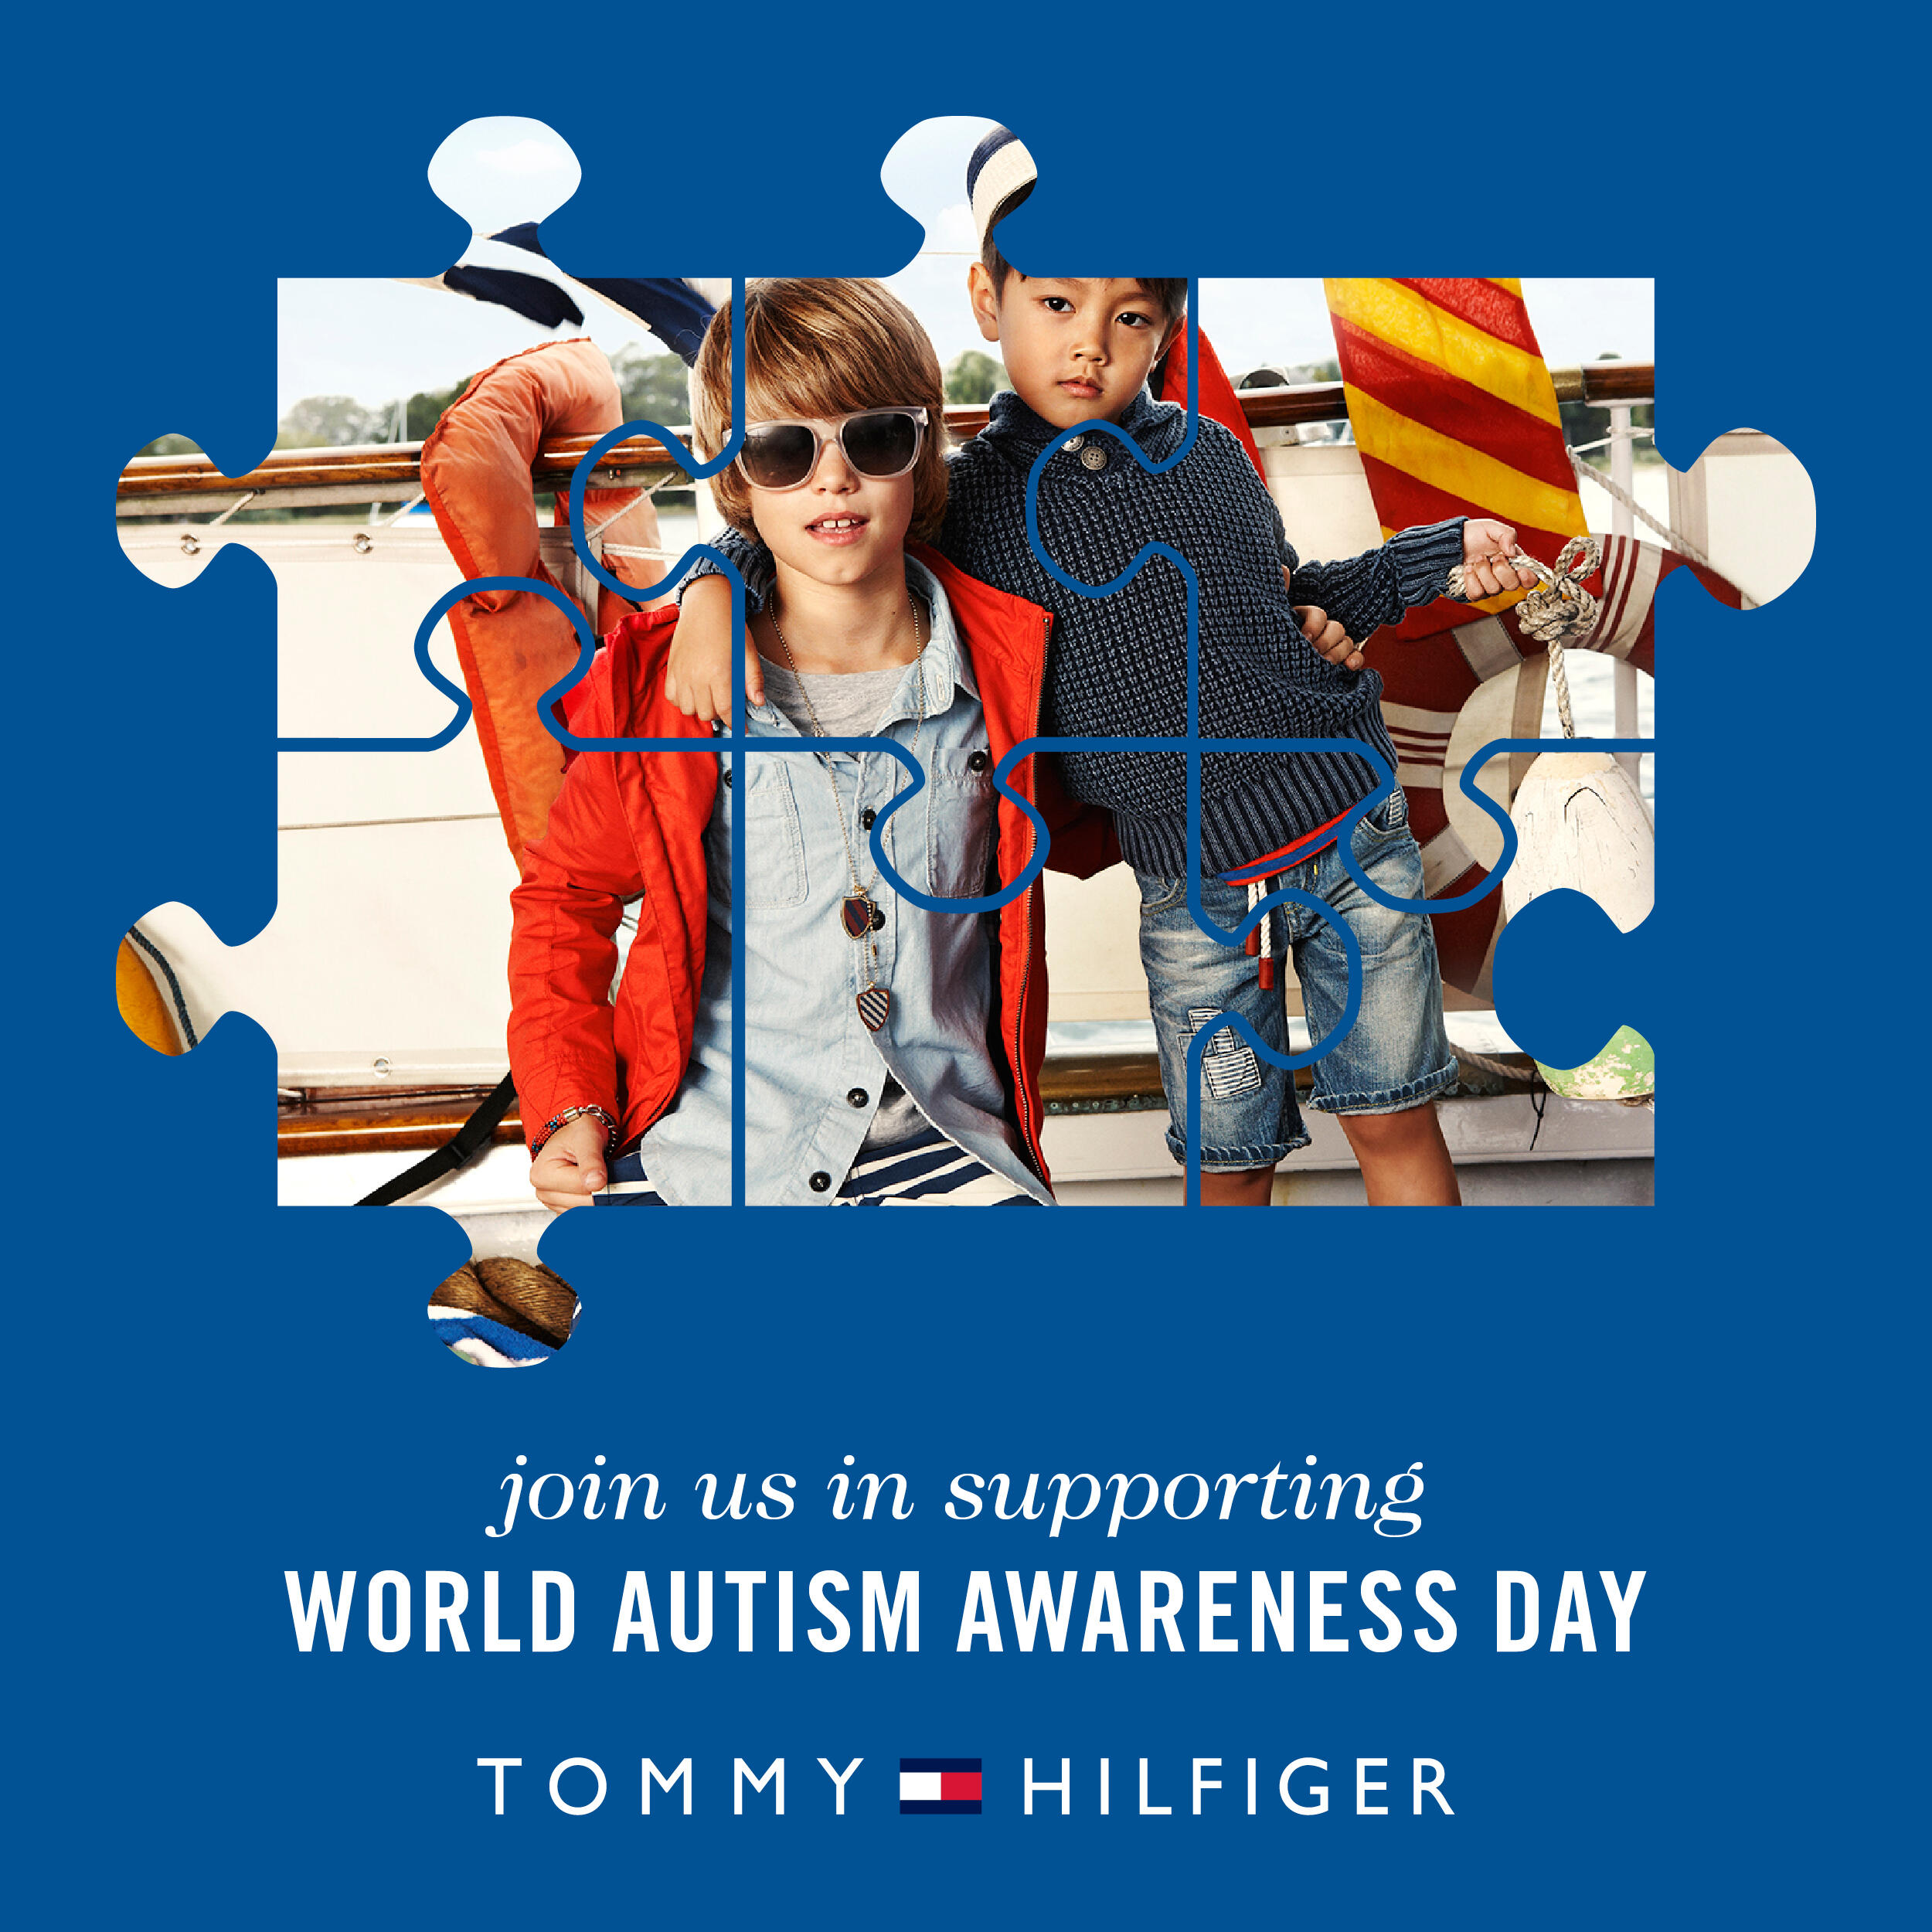 historie fe filter Tommy Hilfiger on X: "Please join us in supporting World Autism Awareness  Day alongside @autismspeaks today. #AutismAwarenessDay  http://t.co/61NZLbsMeg" / X